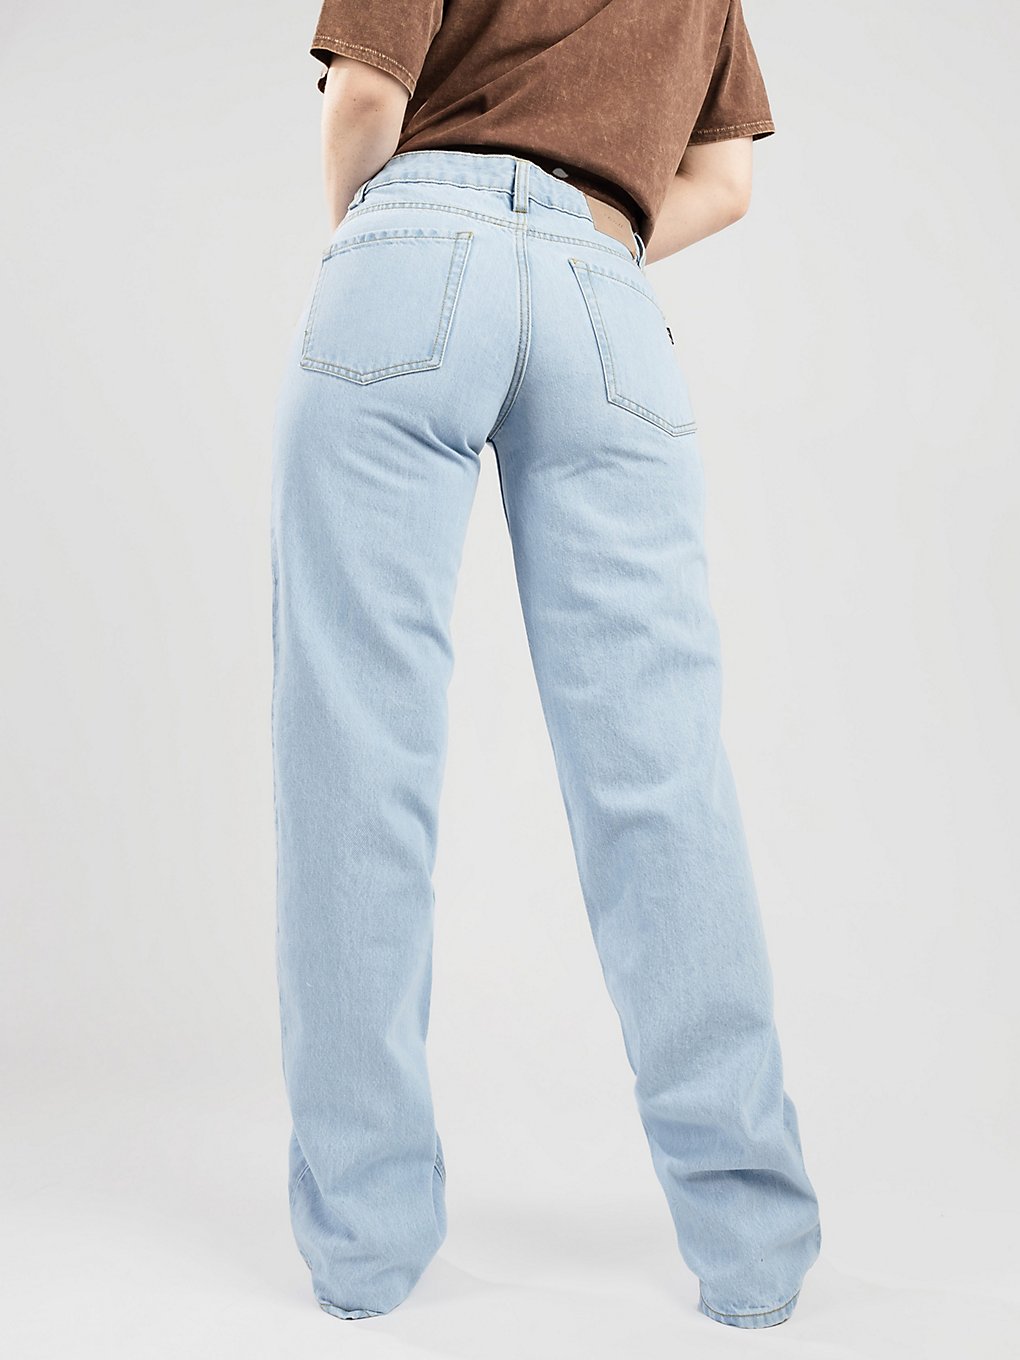 REELL Holly Jeans blauw